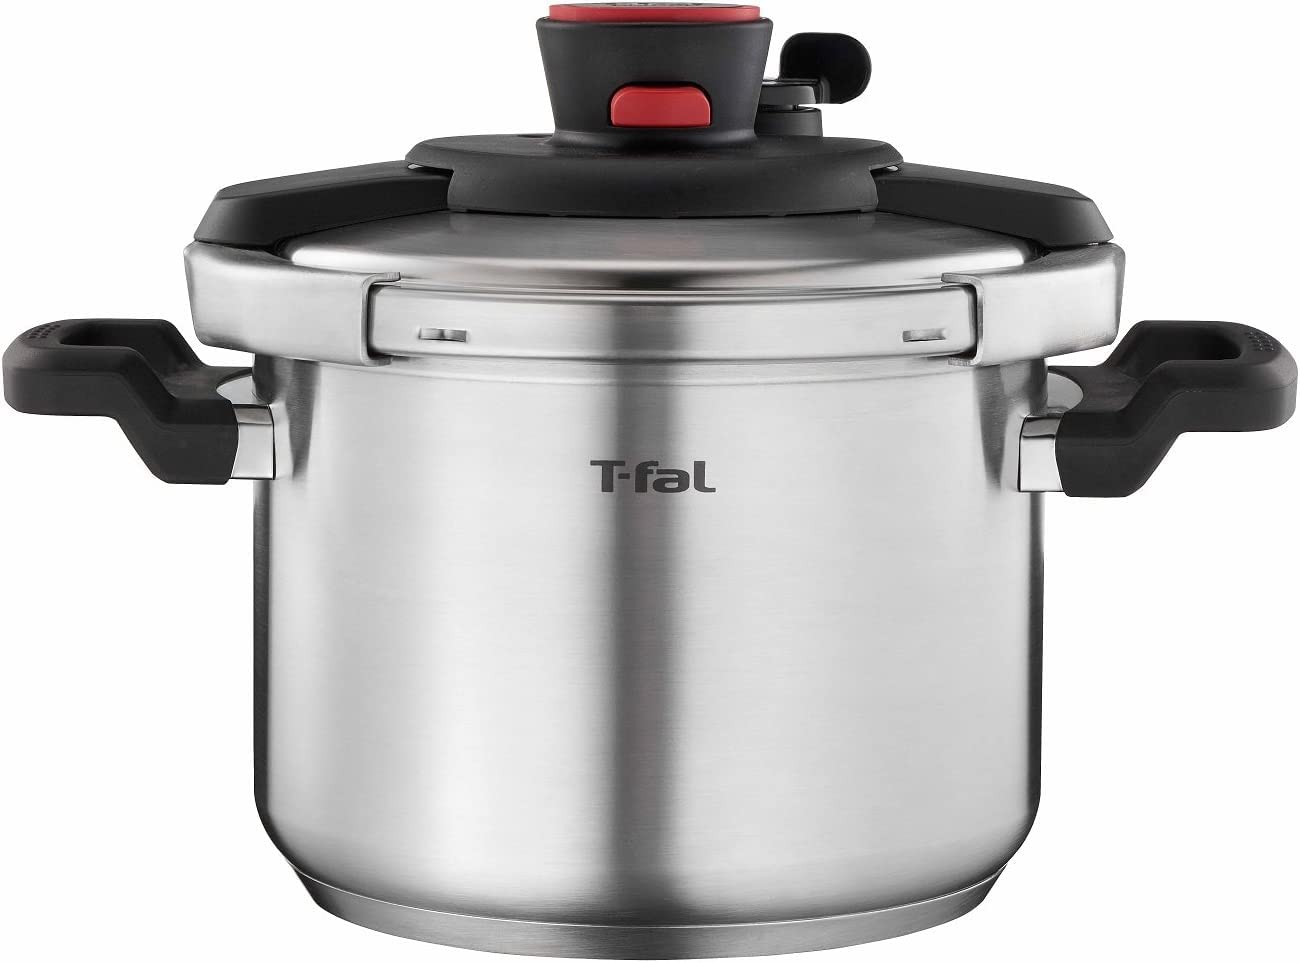 10 best stainless steel pressure cookers tested reviewed 1145 22 3